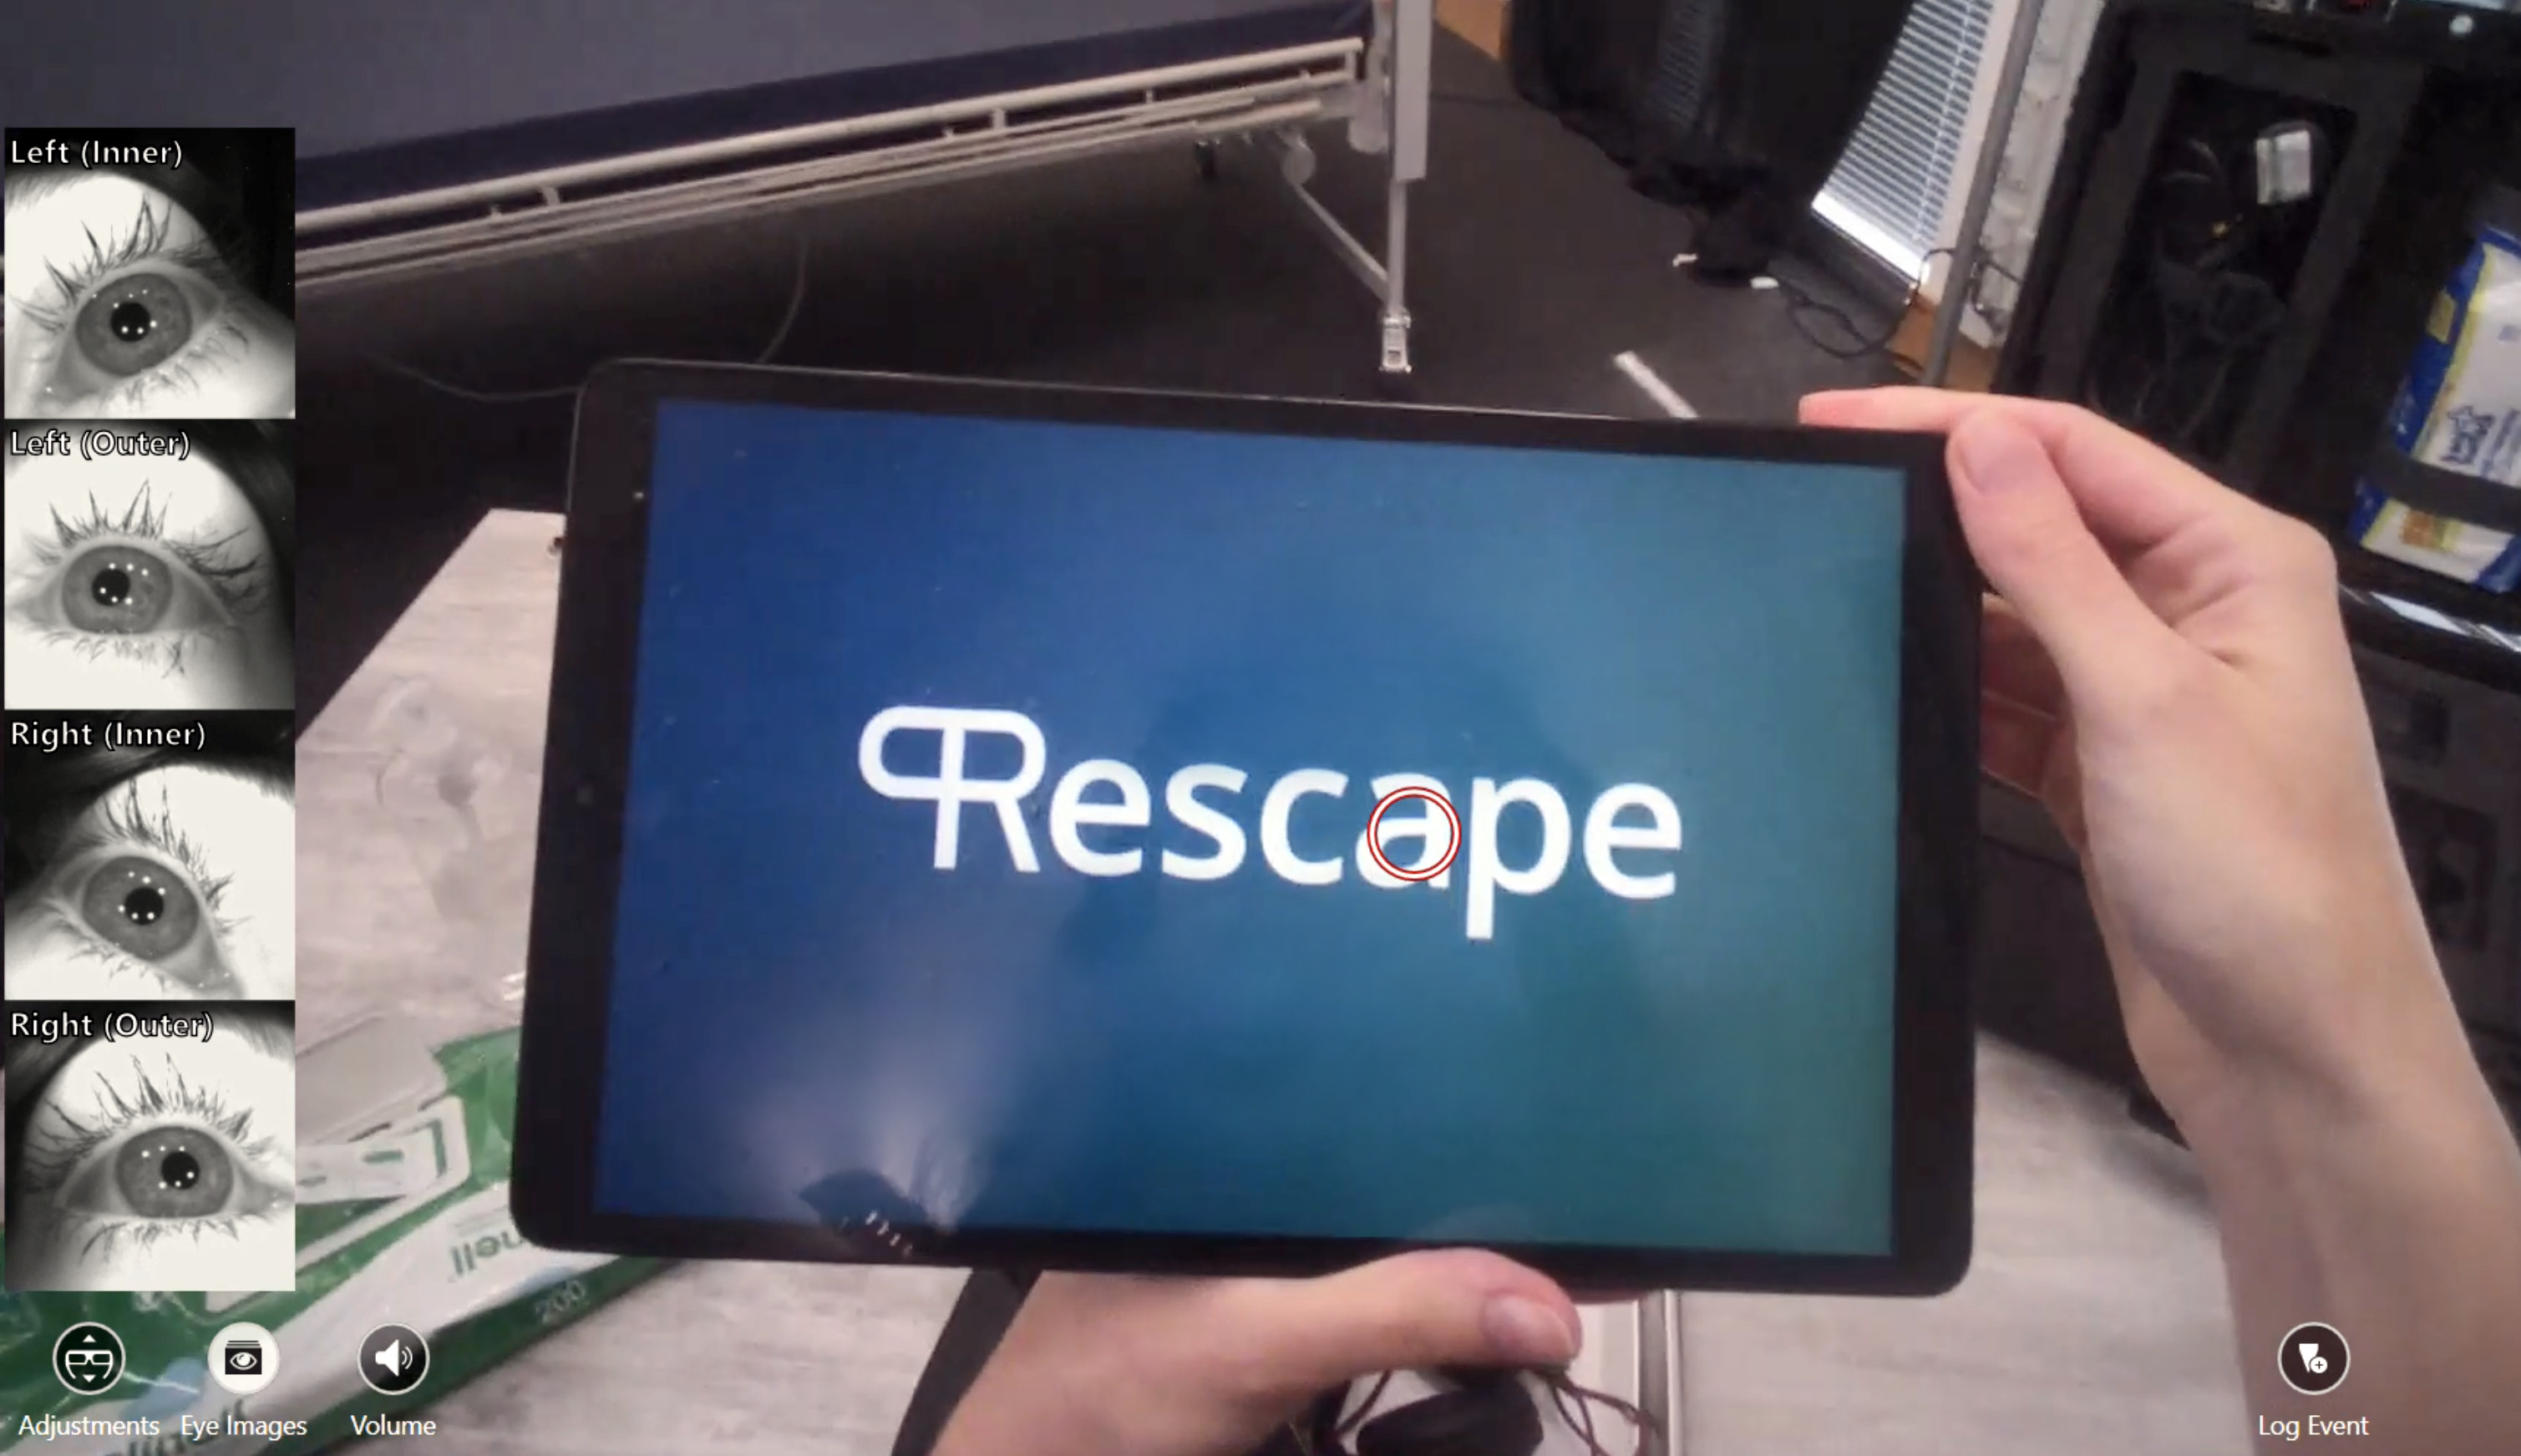 Rescape logo on an tablet